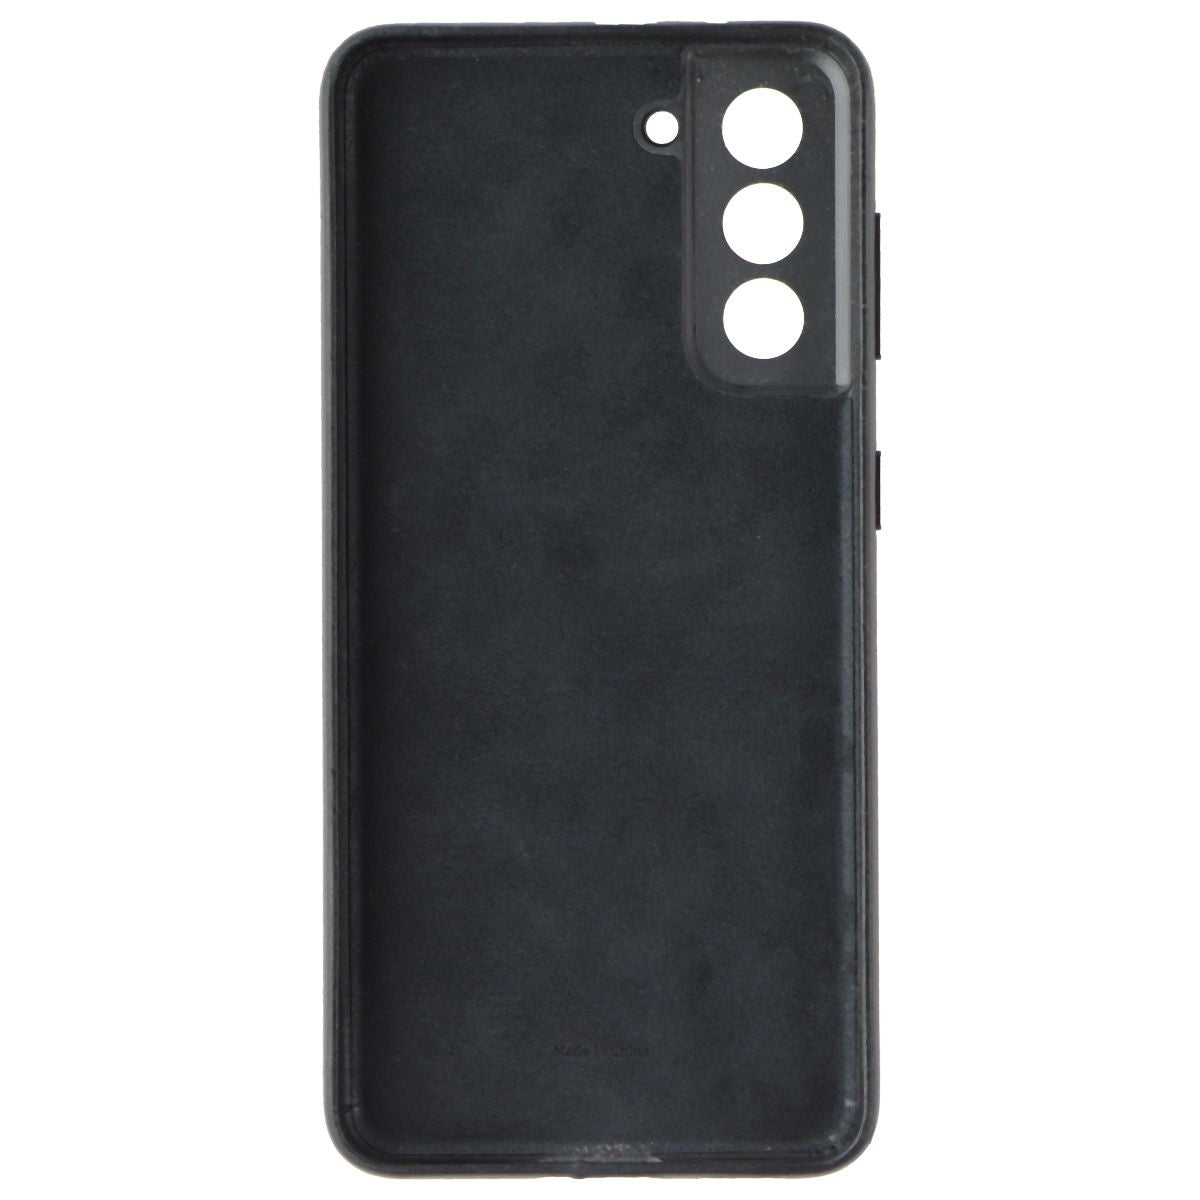 Samsung Leather Case for Samsung Galaxy S23 - Black (EF-VS911LBE) Cell Phone - Cases, Covers & Skins Samsung    - Simple Cell Bulk Wholesale Pricing - USA Seller